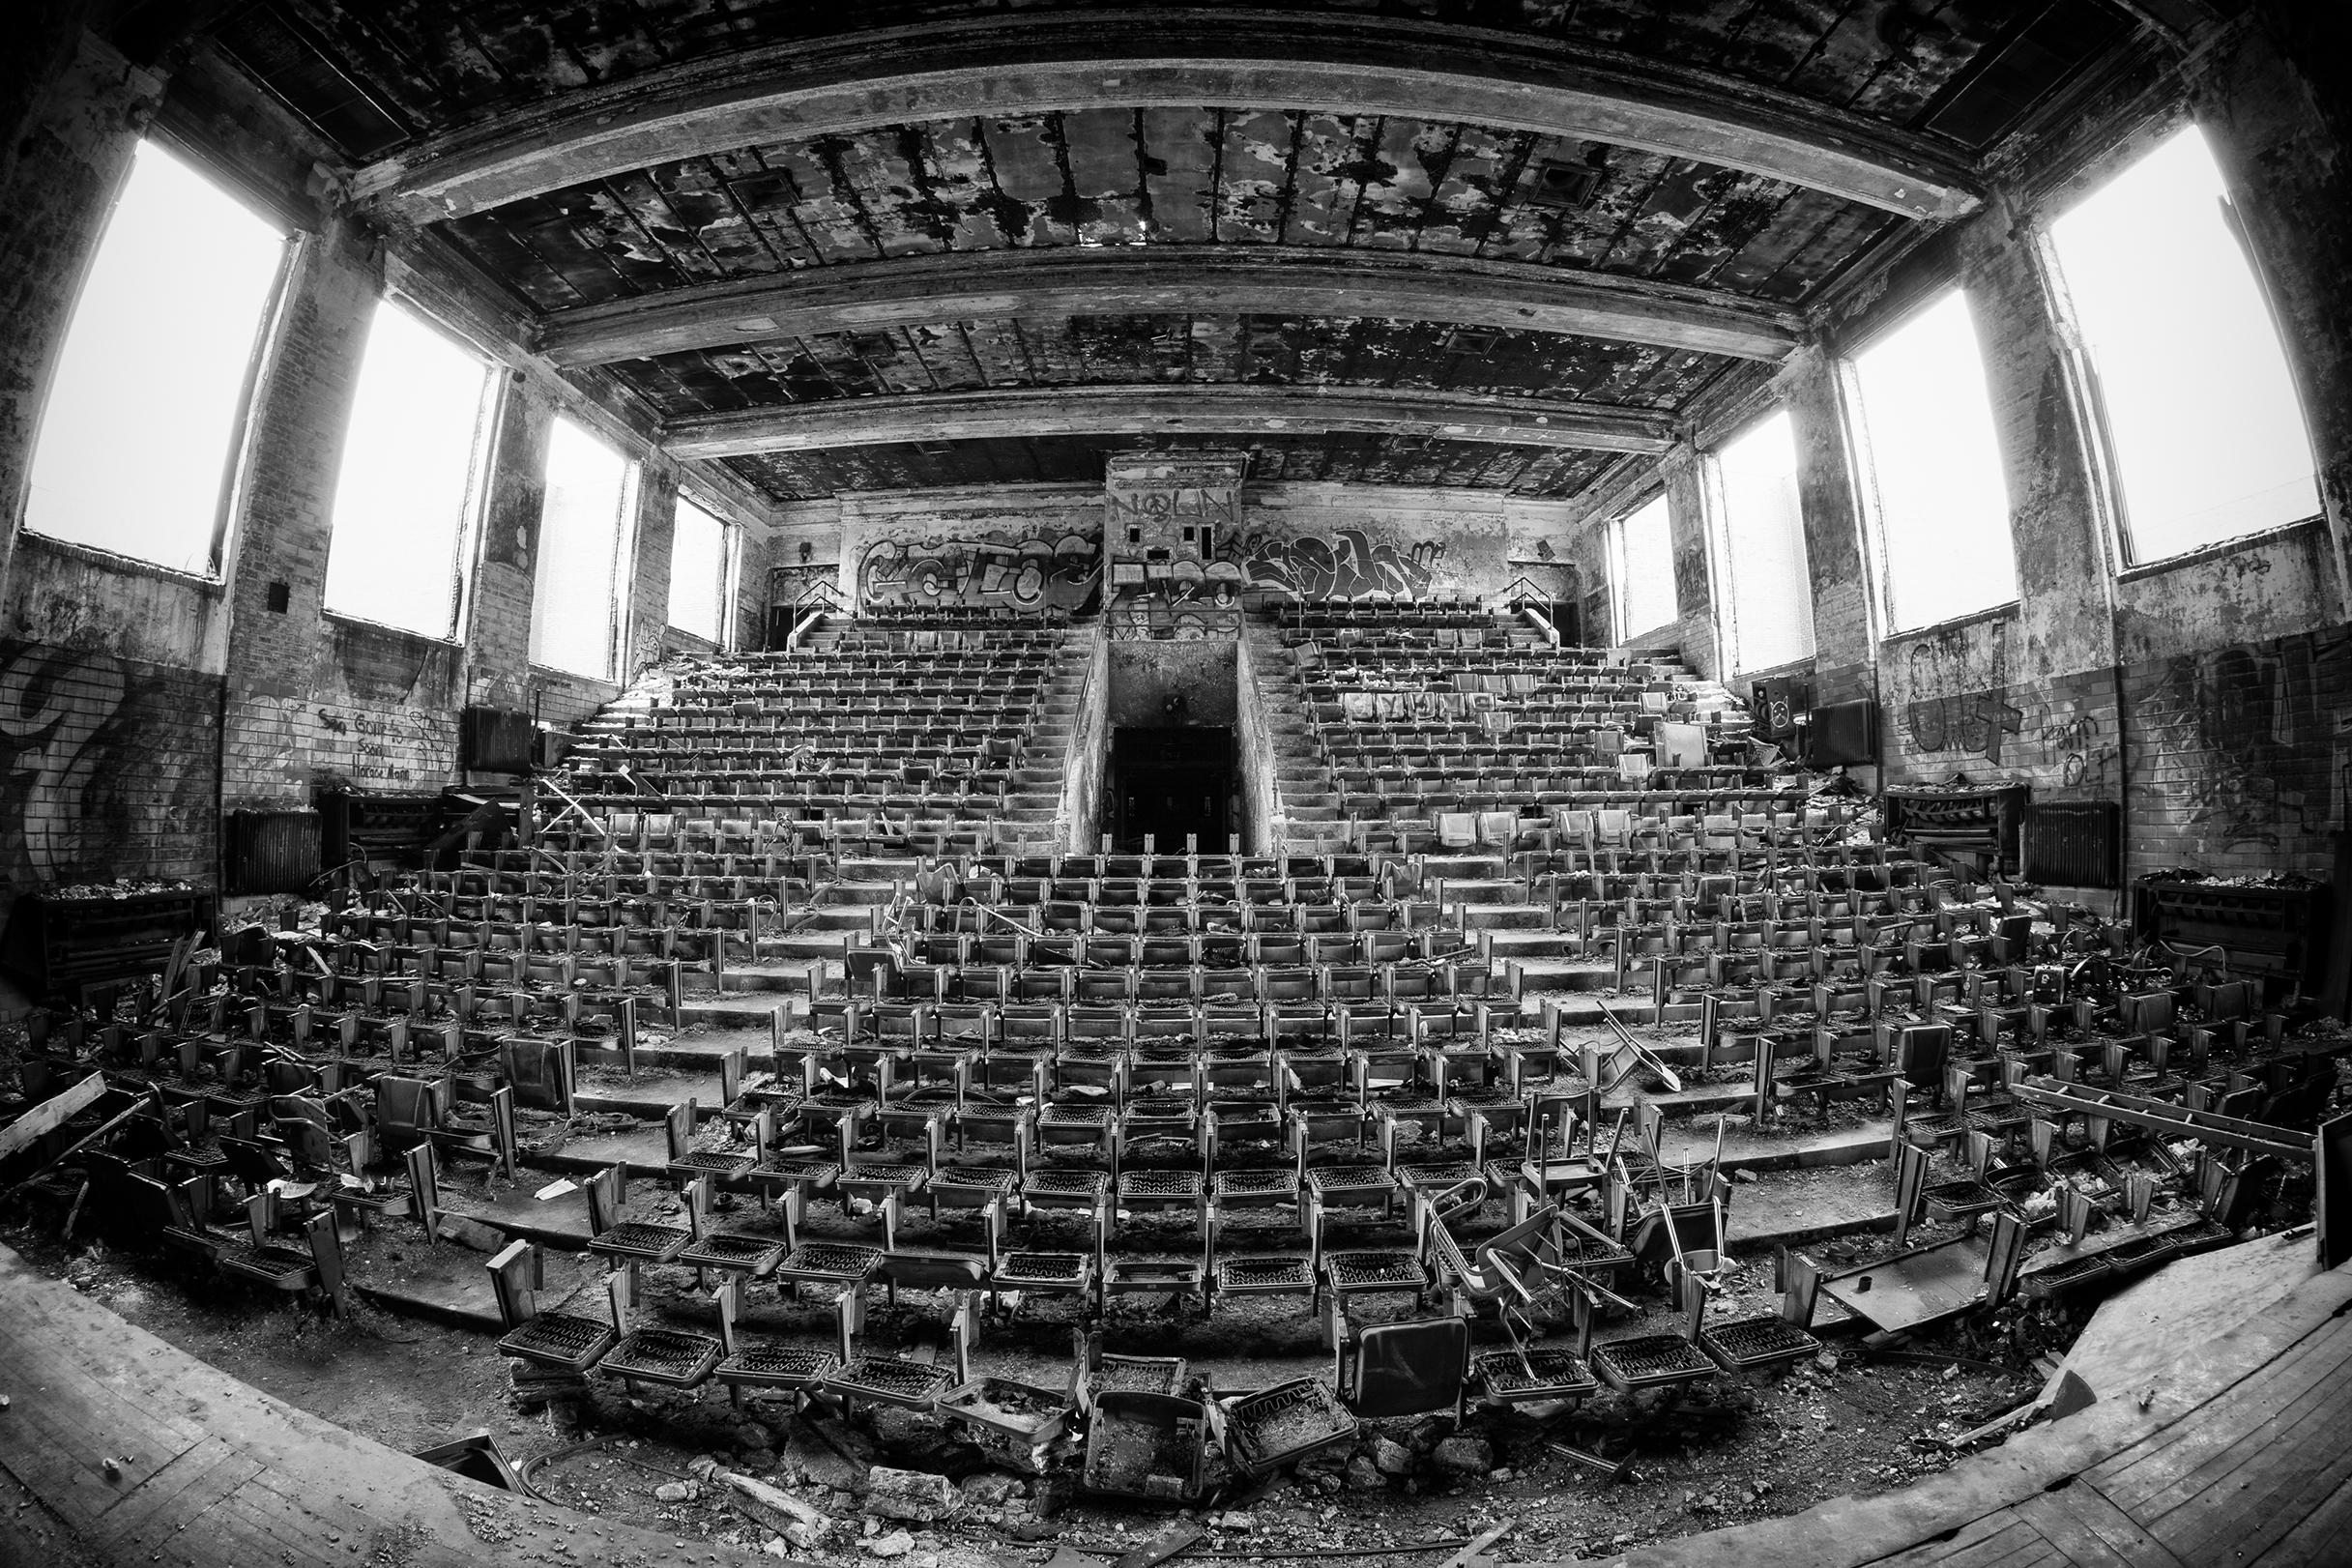 Rebecca Skinner Black and White Photograph - "Burned Out", contemporary, stadium, abandoned, school, black, white, photograph